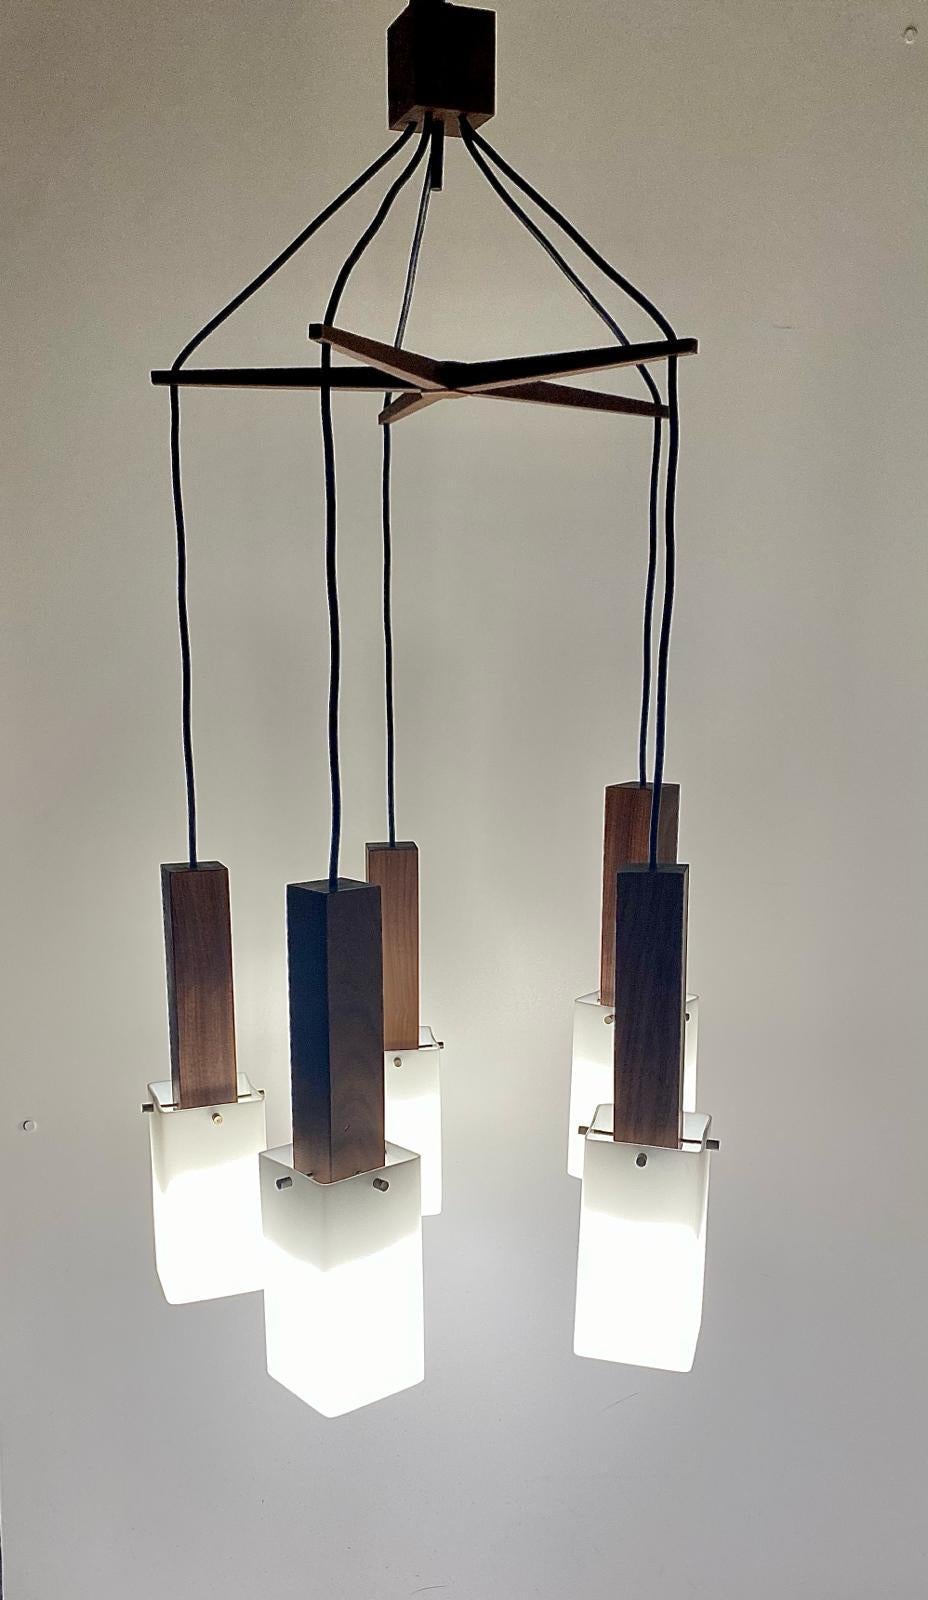 Vintage Wood Hanging Chandelier, Guzzini Italy, 1960 's For Sale 6